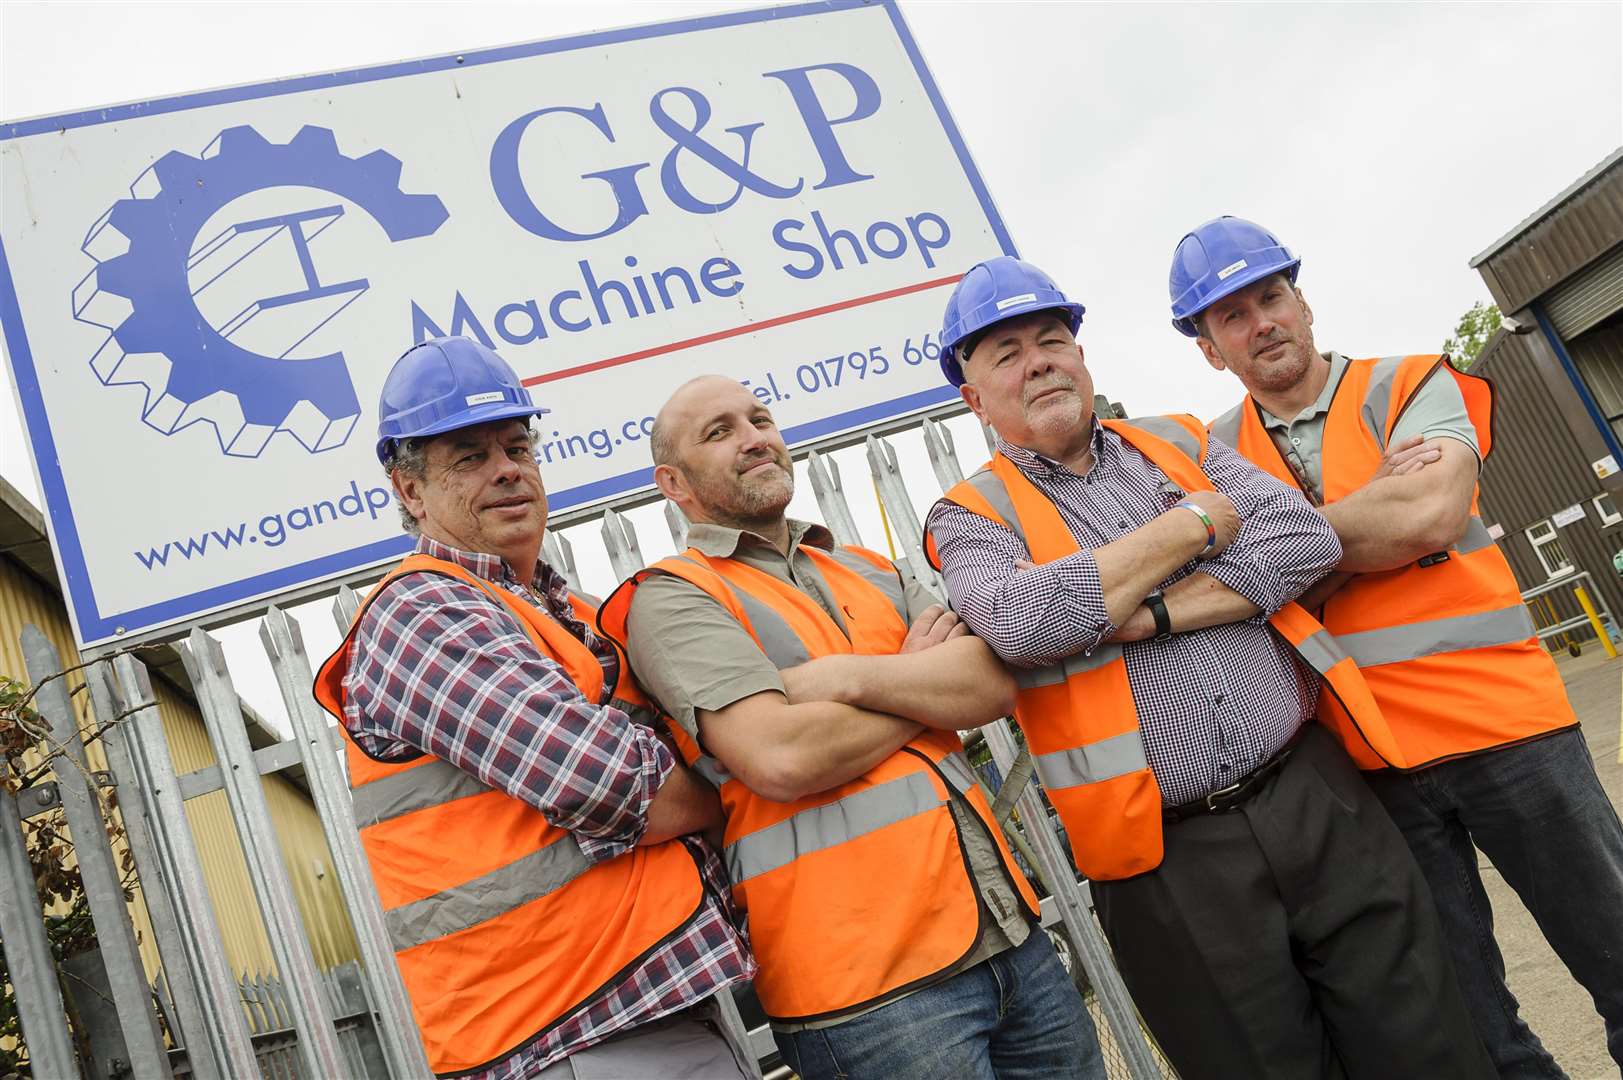 Sheppey firm G&P which was formed by owner Gerry Lawson- pictured after their firm was commended for the quality of their engineering work on the Woolwich Ferry Picture: Andy Payton